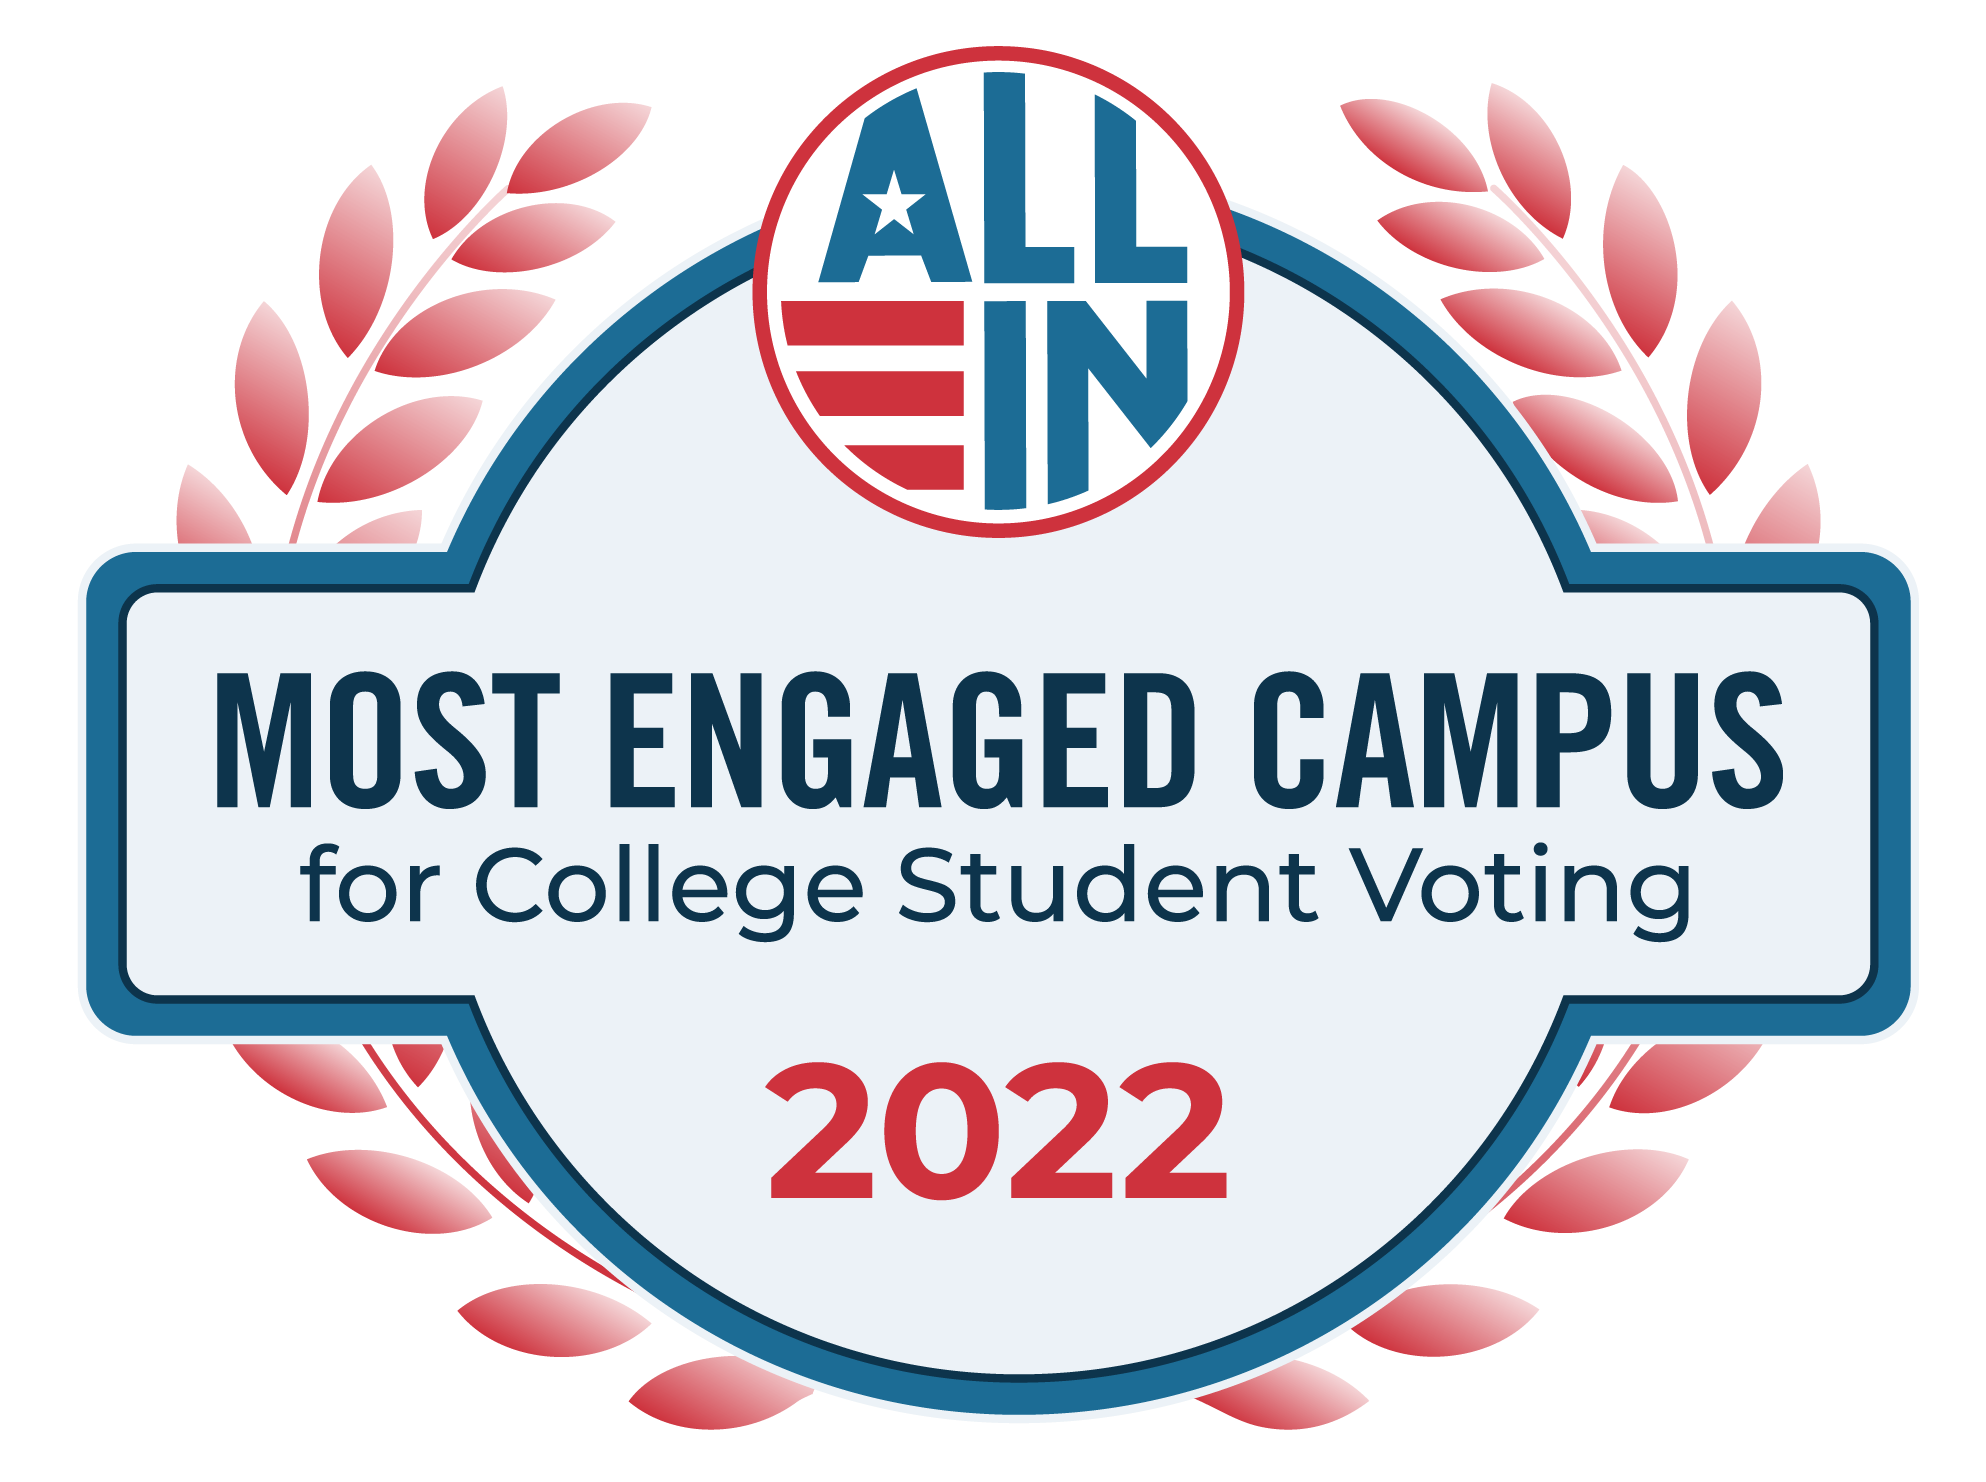 Most engaged campus 2022 logo